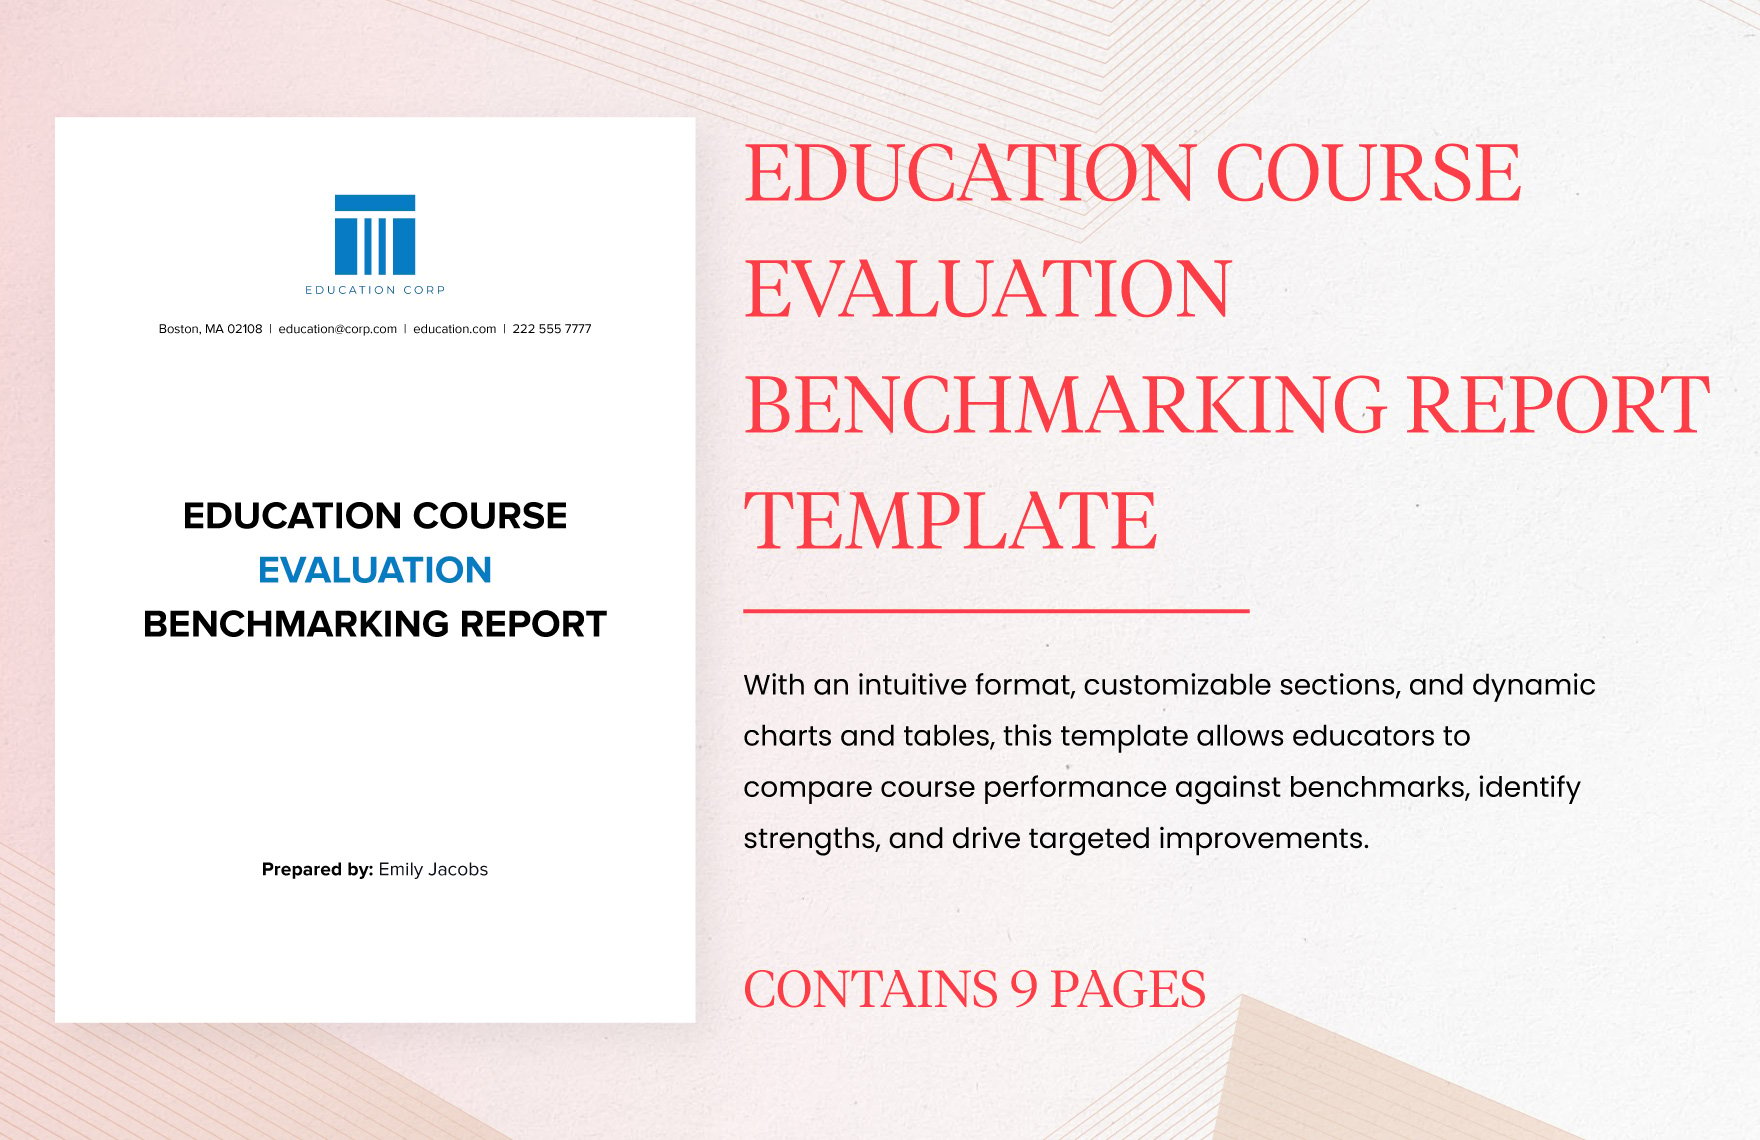 Education Course Evaluation Benchmarking Report Template